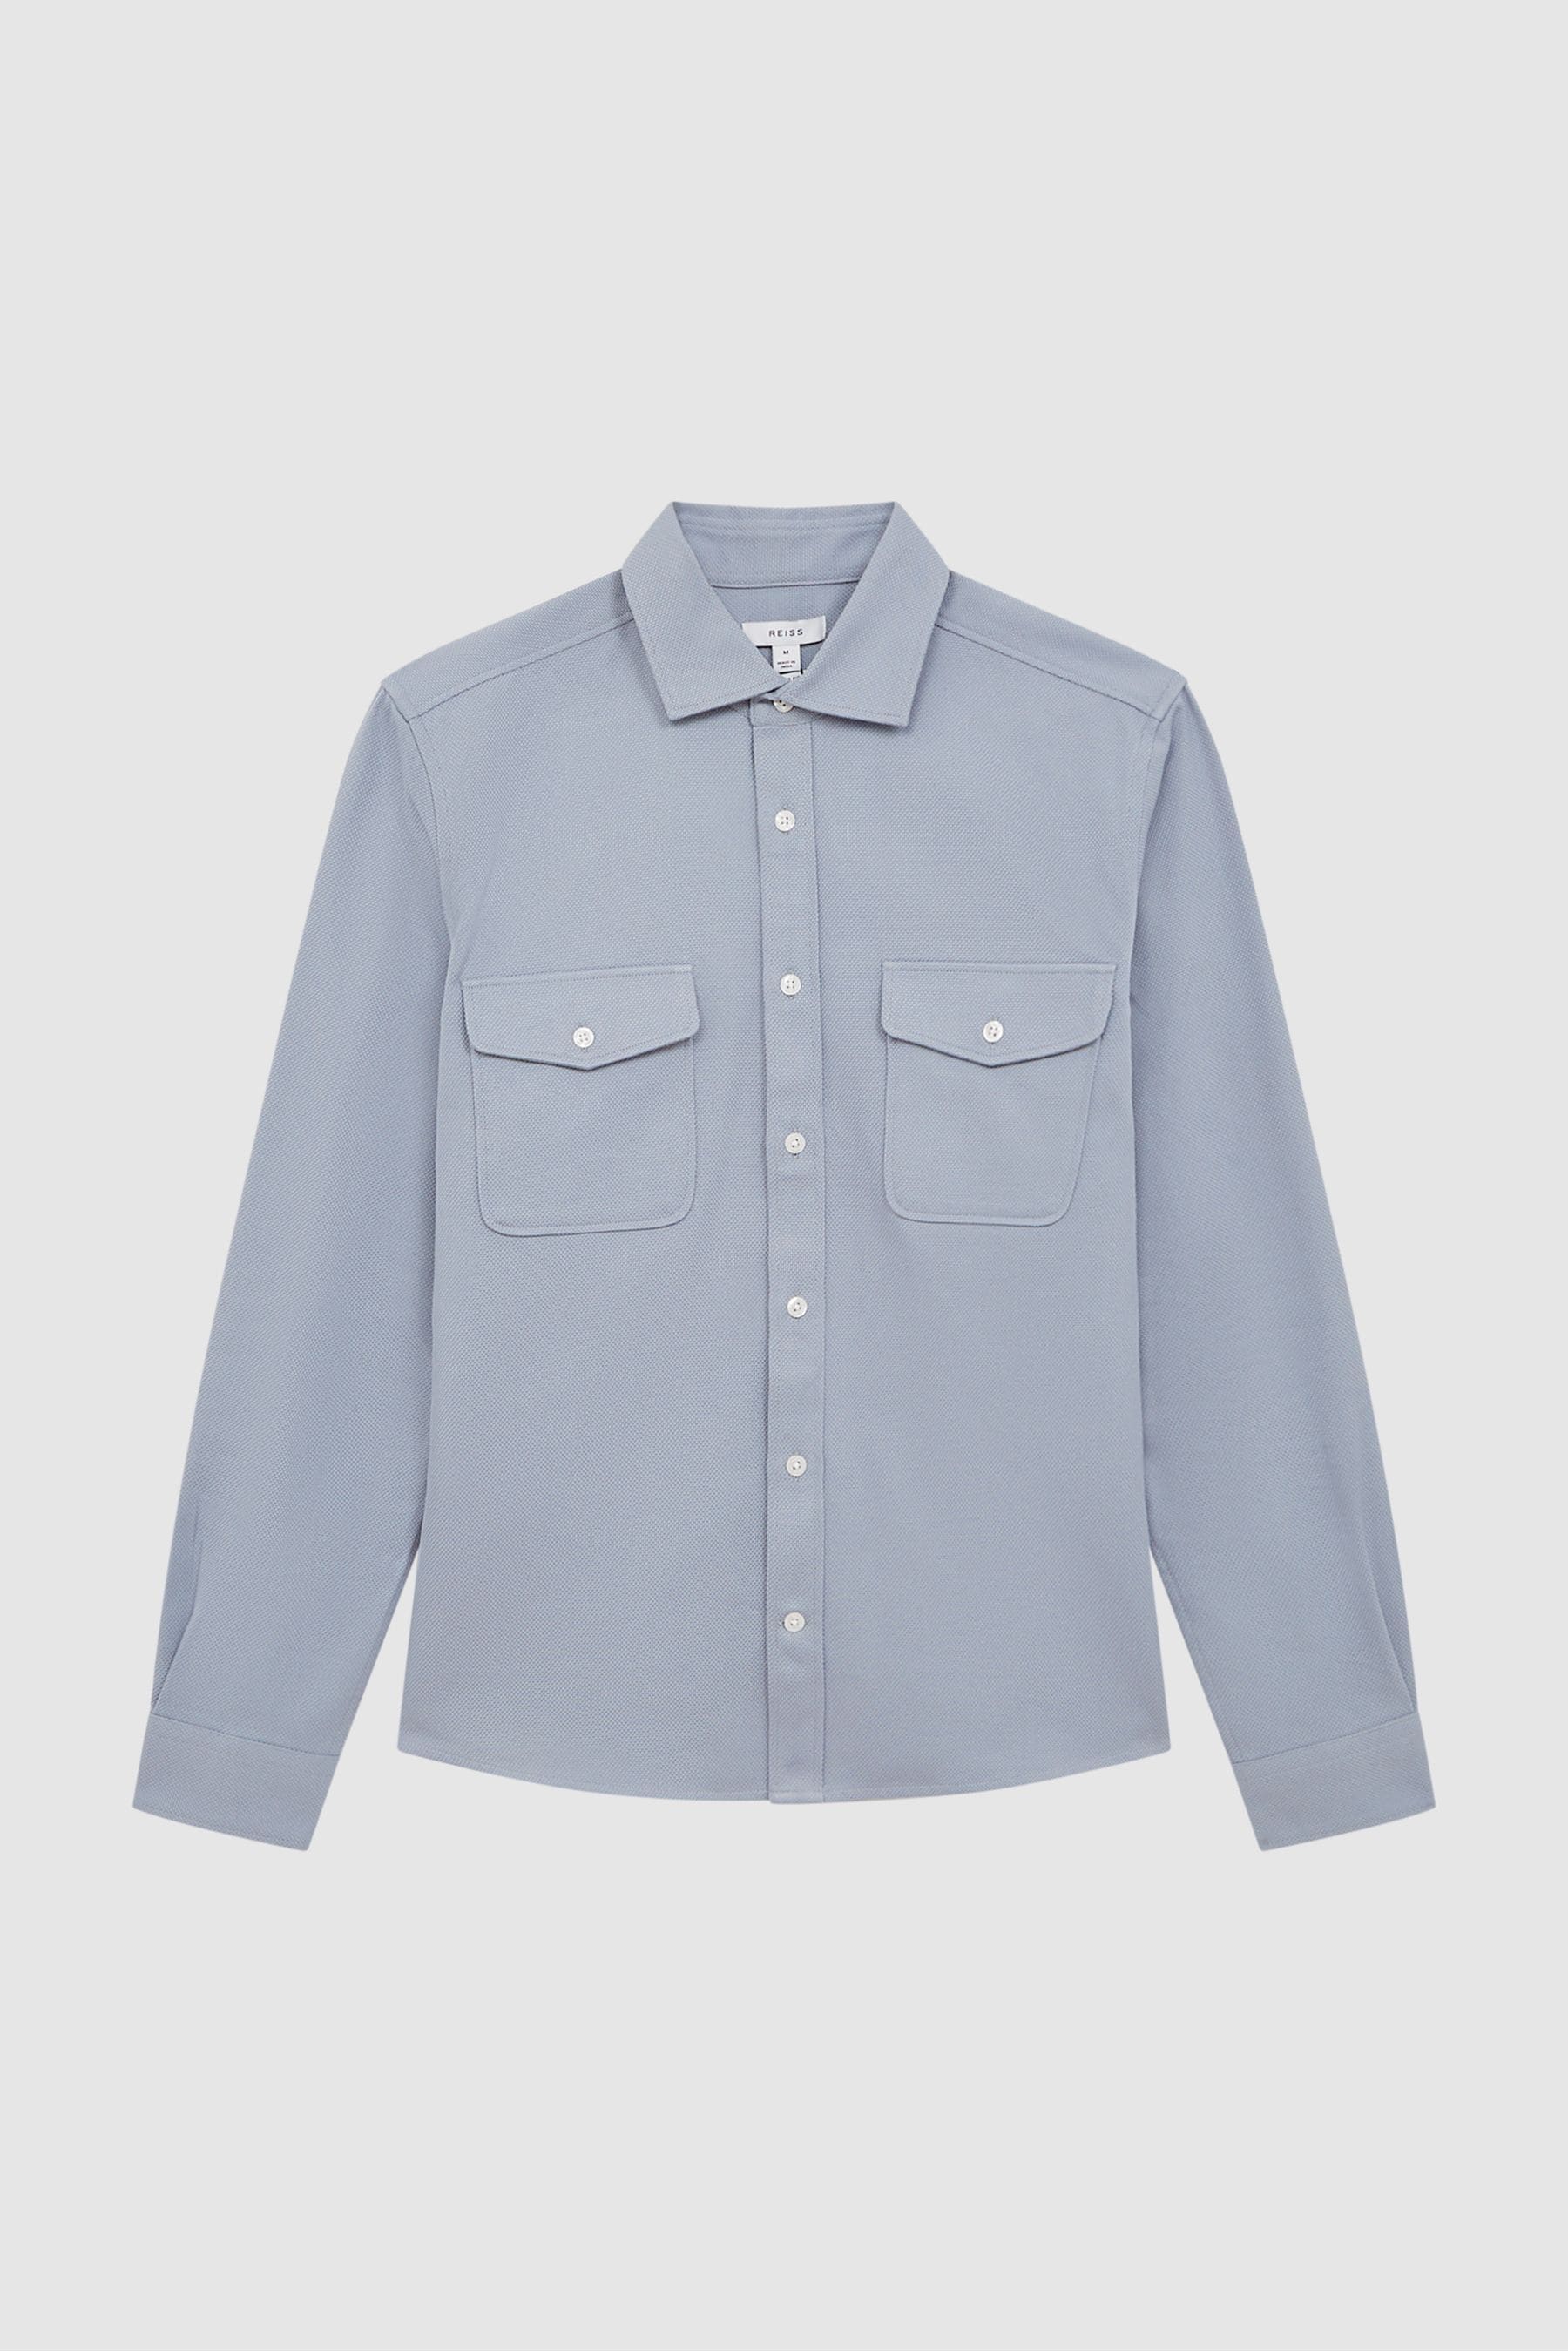 Buy Reiss Arlo Cotton Canvas Overshirt from the Next UK online shop